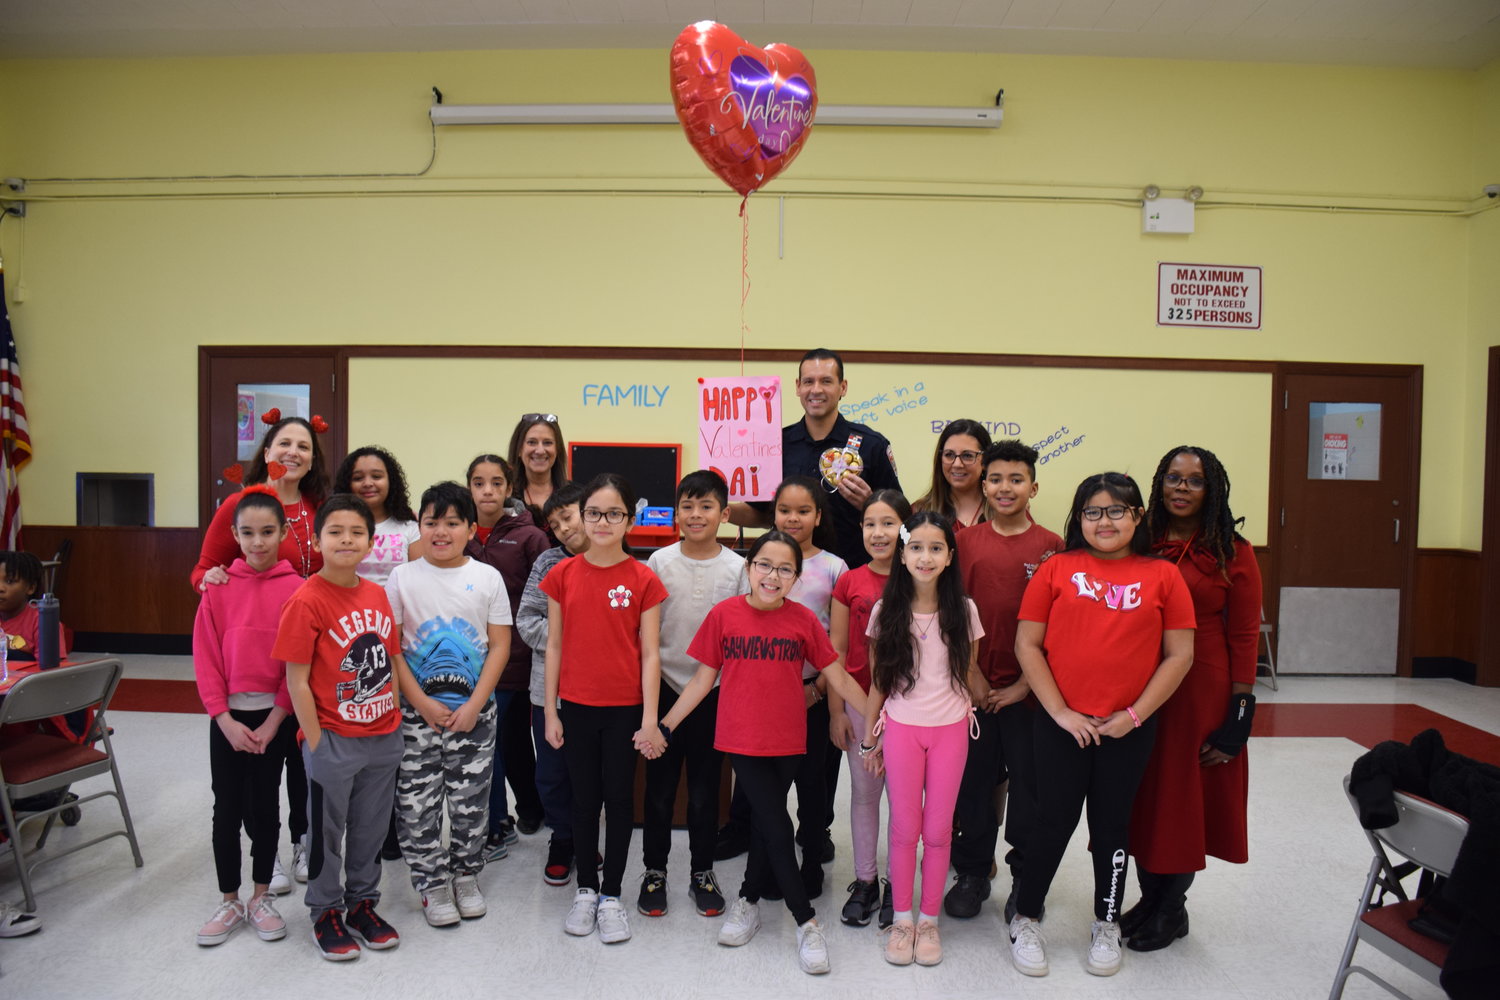 Bayview Avenue Elementary School’s Principal Kelly Fairclough and social worker and Adopt-a-Cop program organizer Cindy Misrock were photographed alongside the Freeport Village Police Adopt-a-Cop participants during the annual Valentine’s Day luncheon.